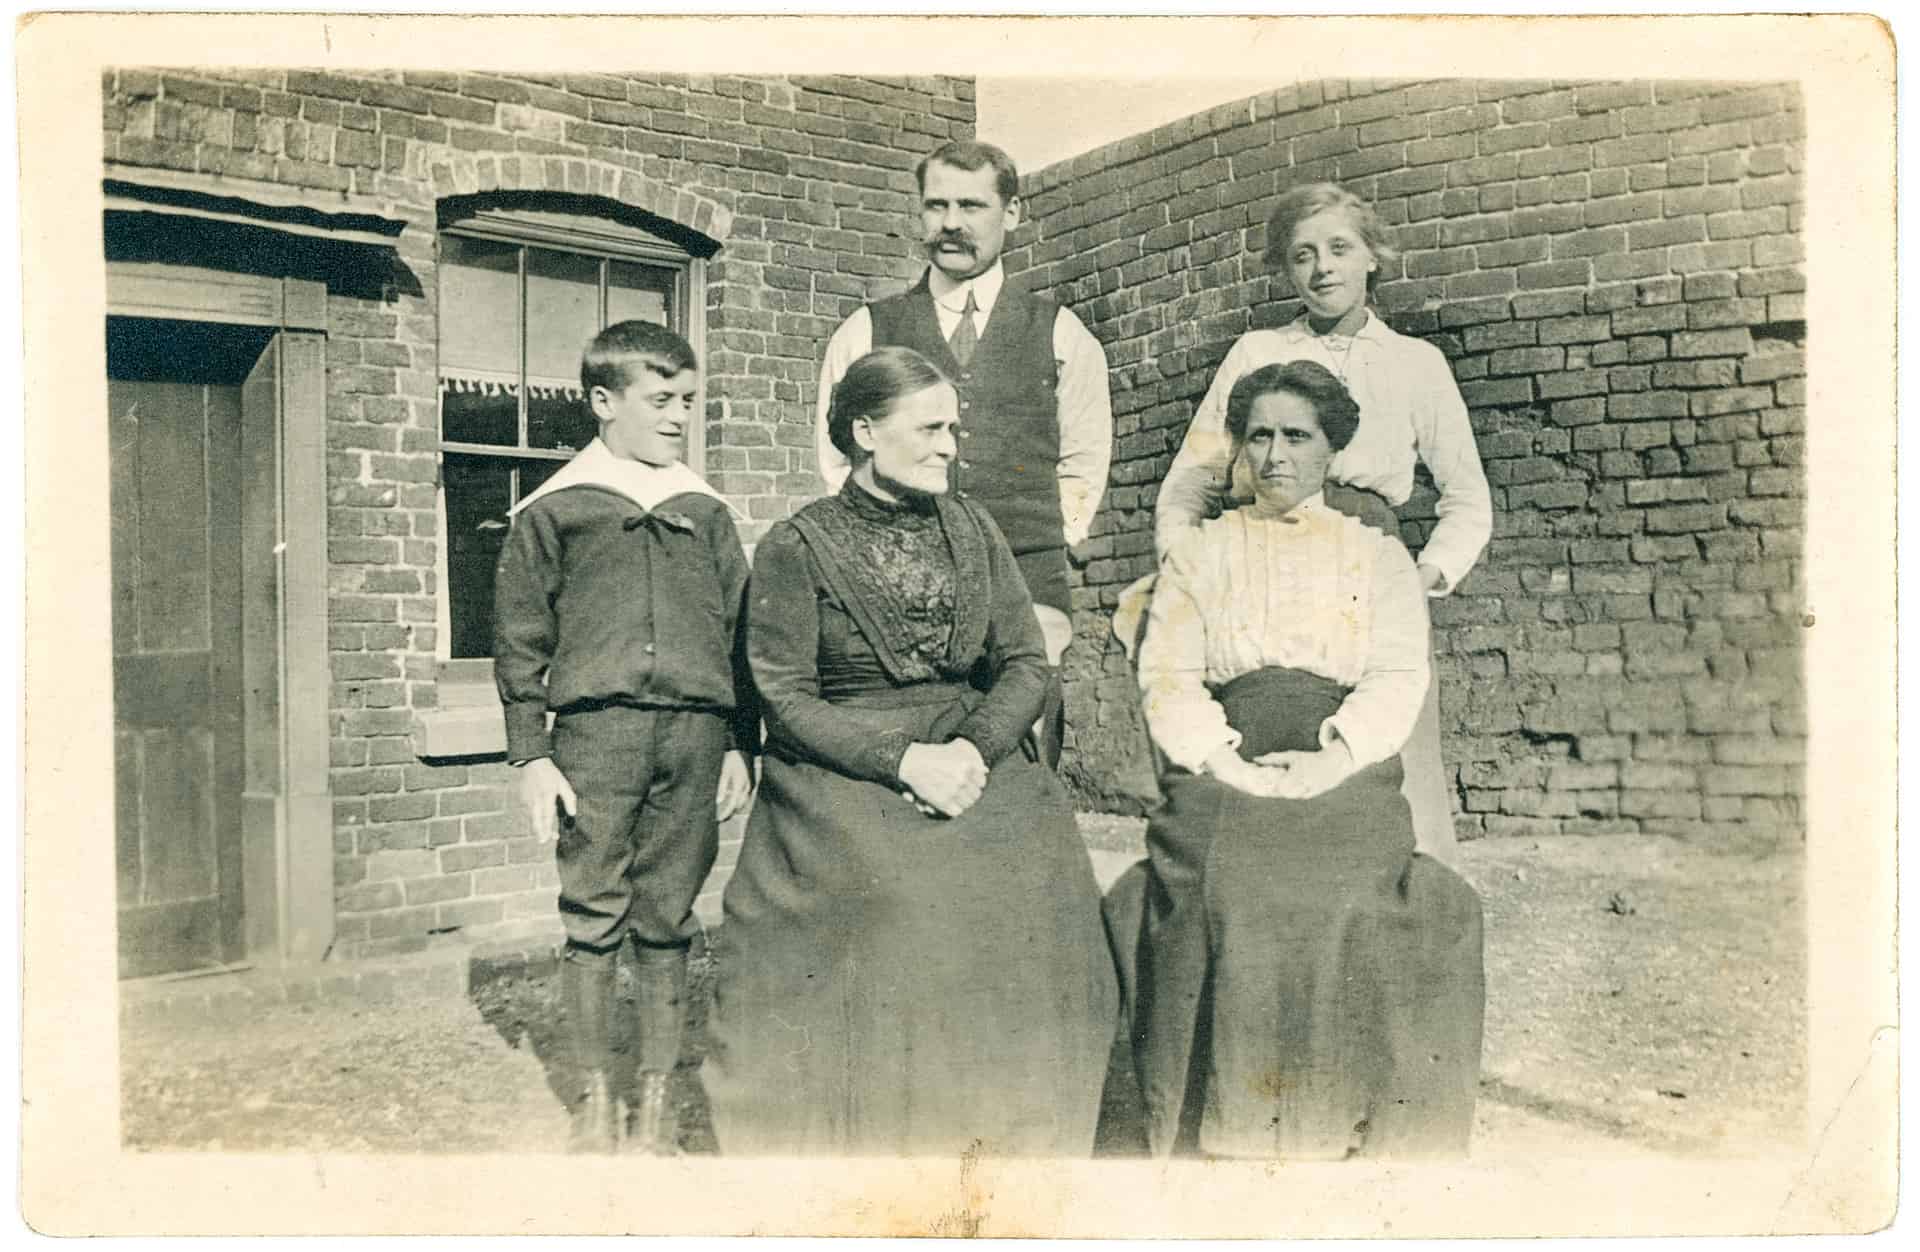 My Mother’s family at home in Burnt Tree area. Probably around the start of The Great War.